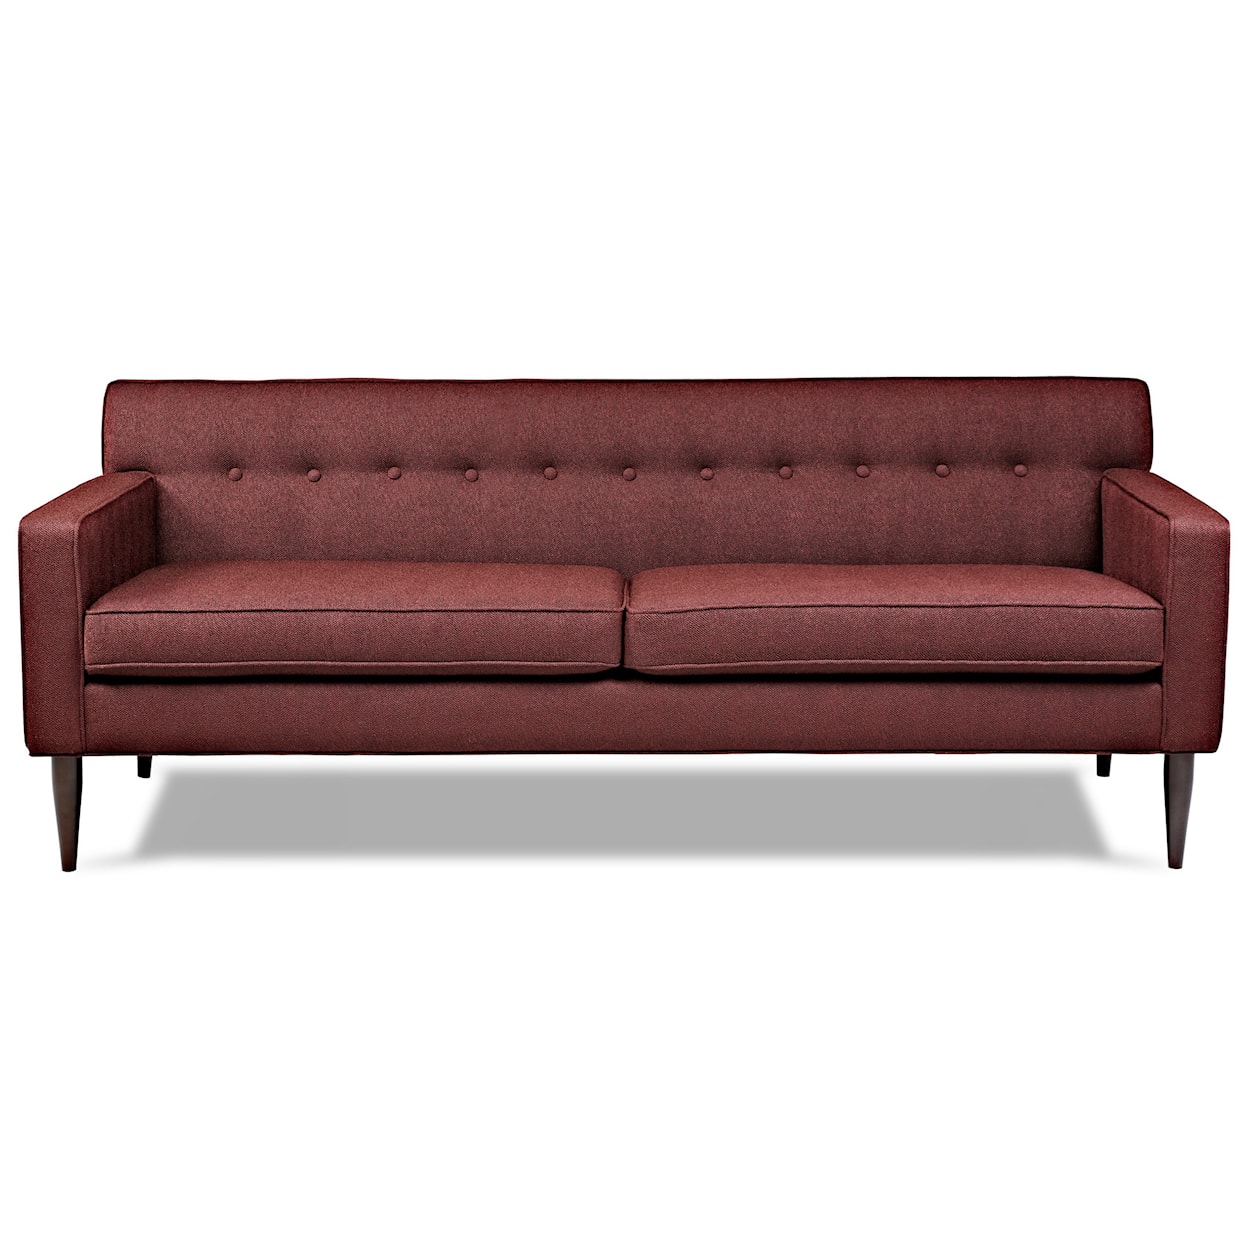 American Leather Quincy 2-Seat Sofa